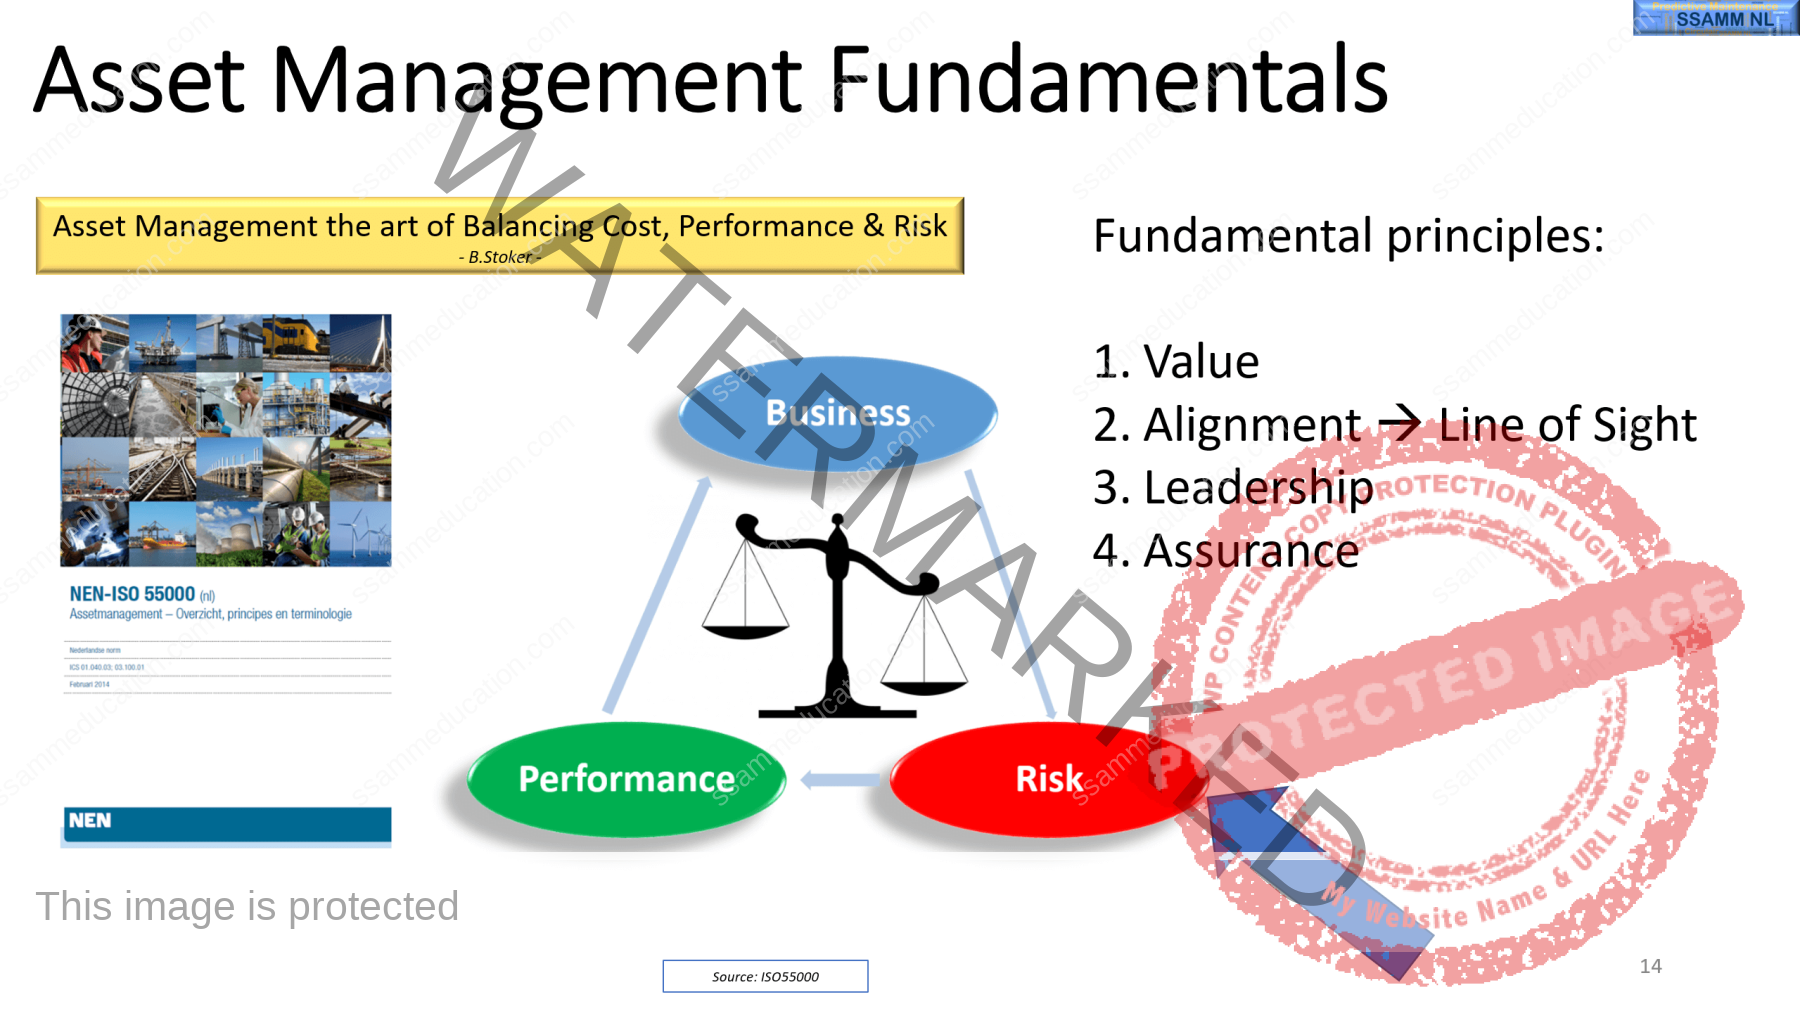 12.-The-art-of-balancing-Costs_Performance-and-Risk